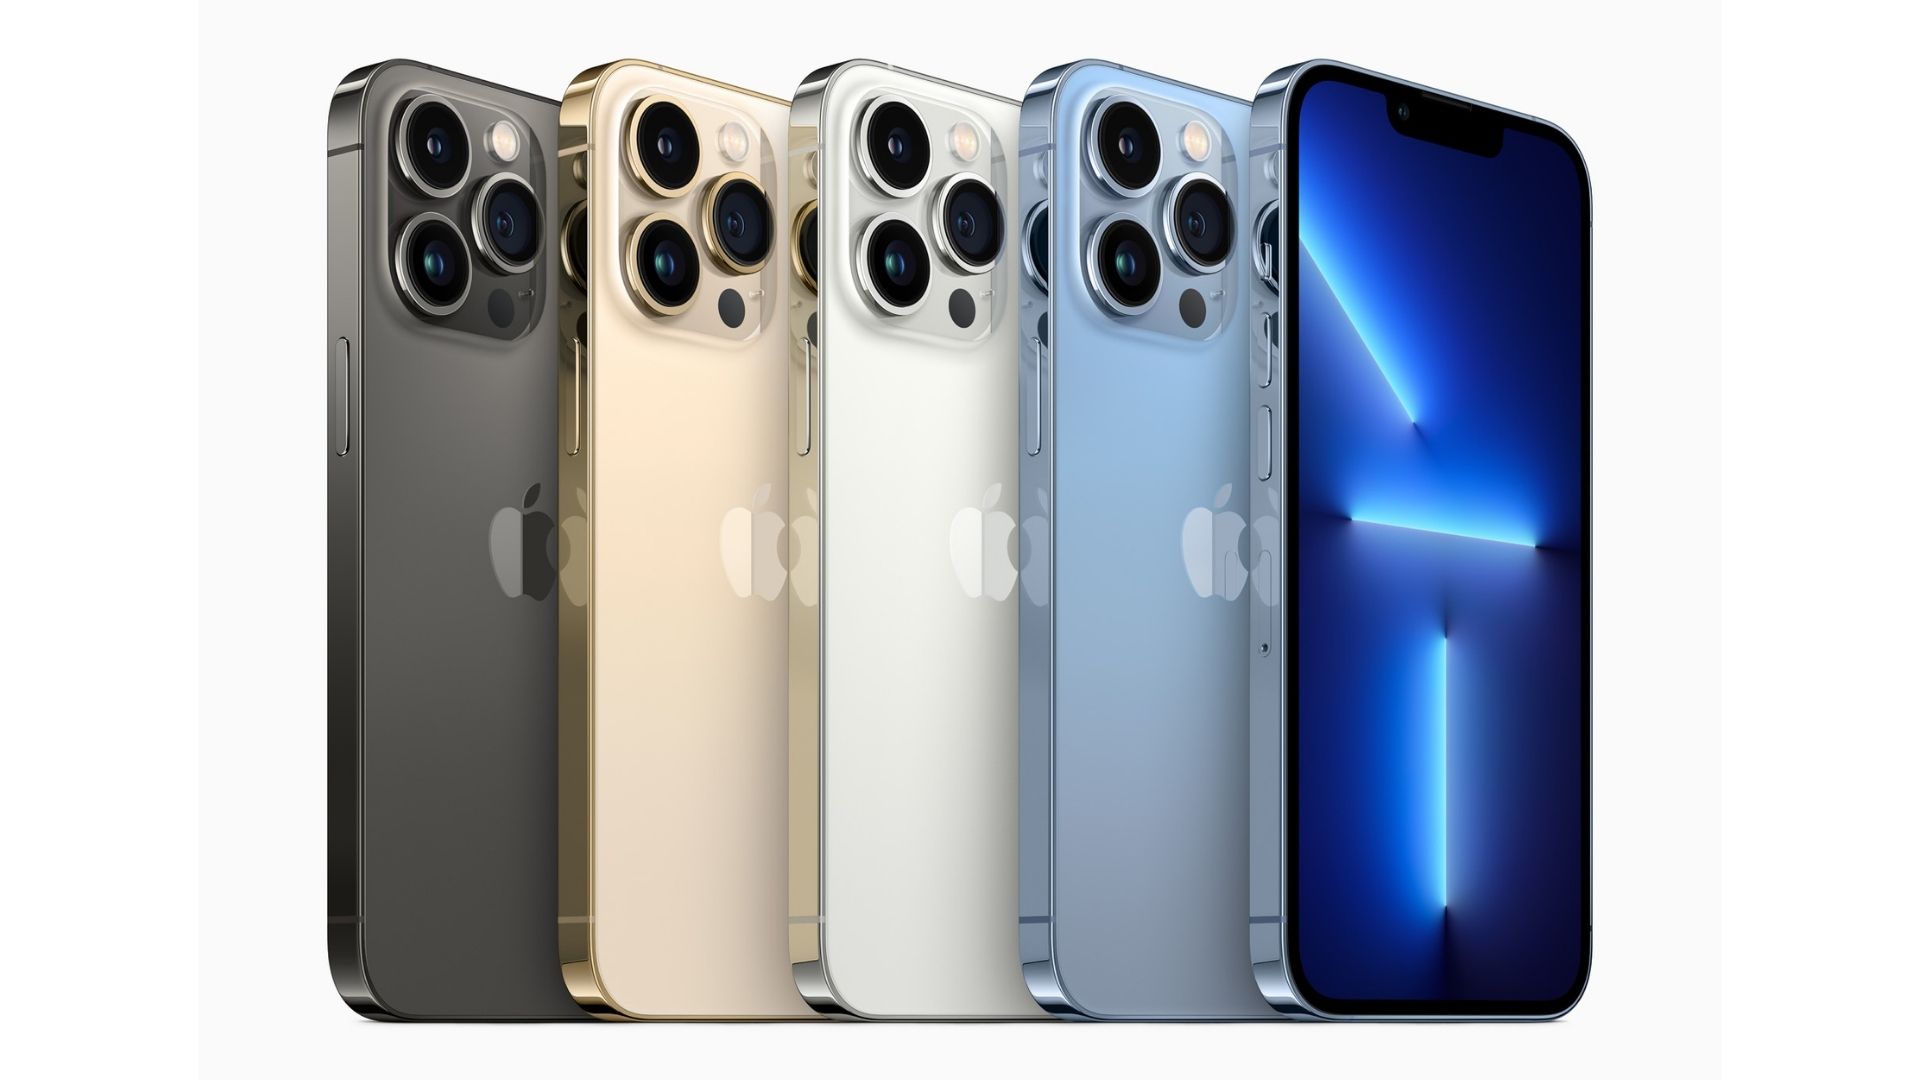 Product photo showing the Apple iPhone 13 Pro is available in black, gold, white and blue